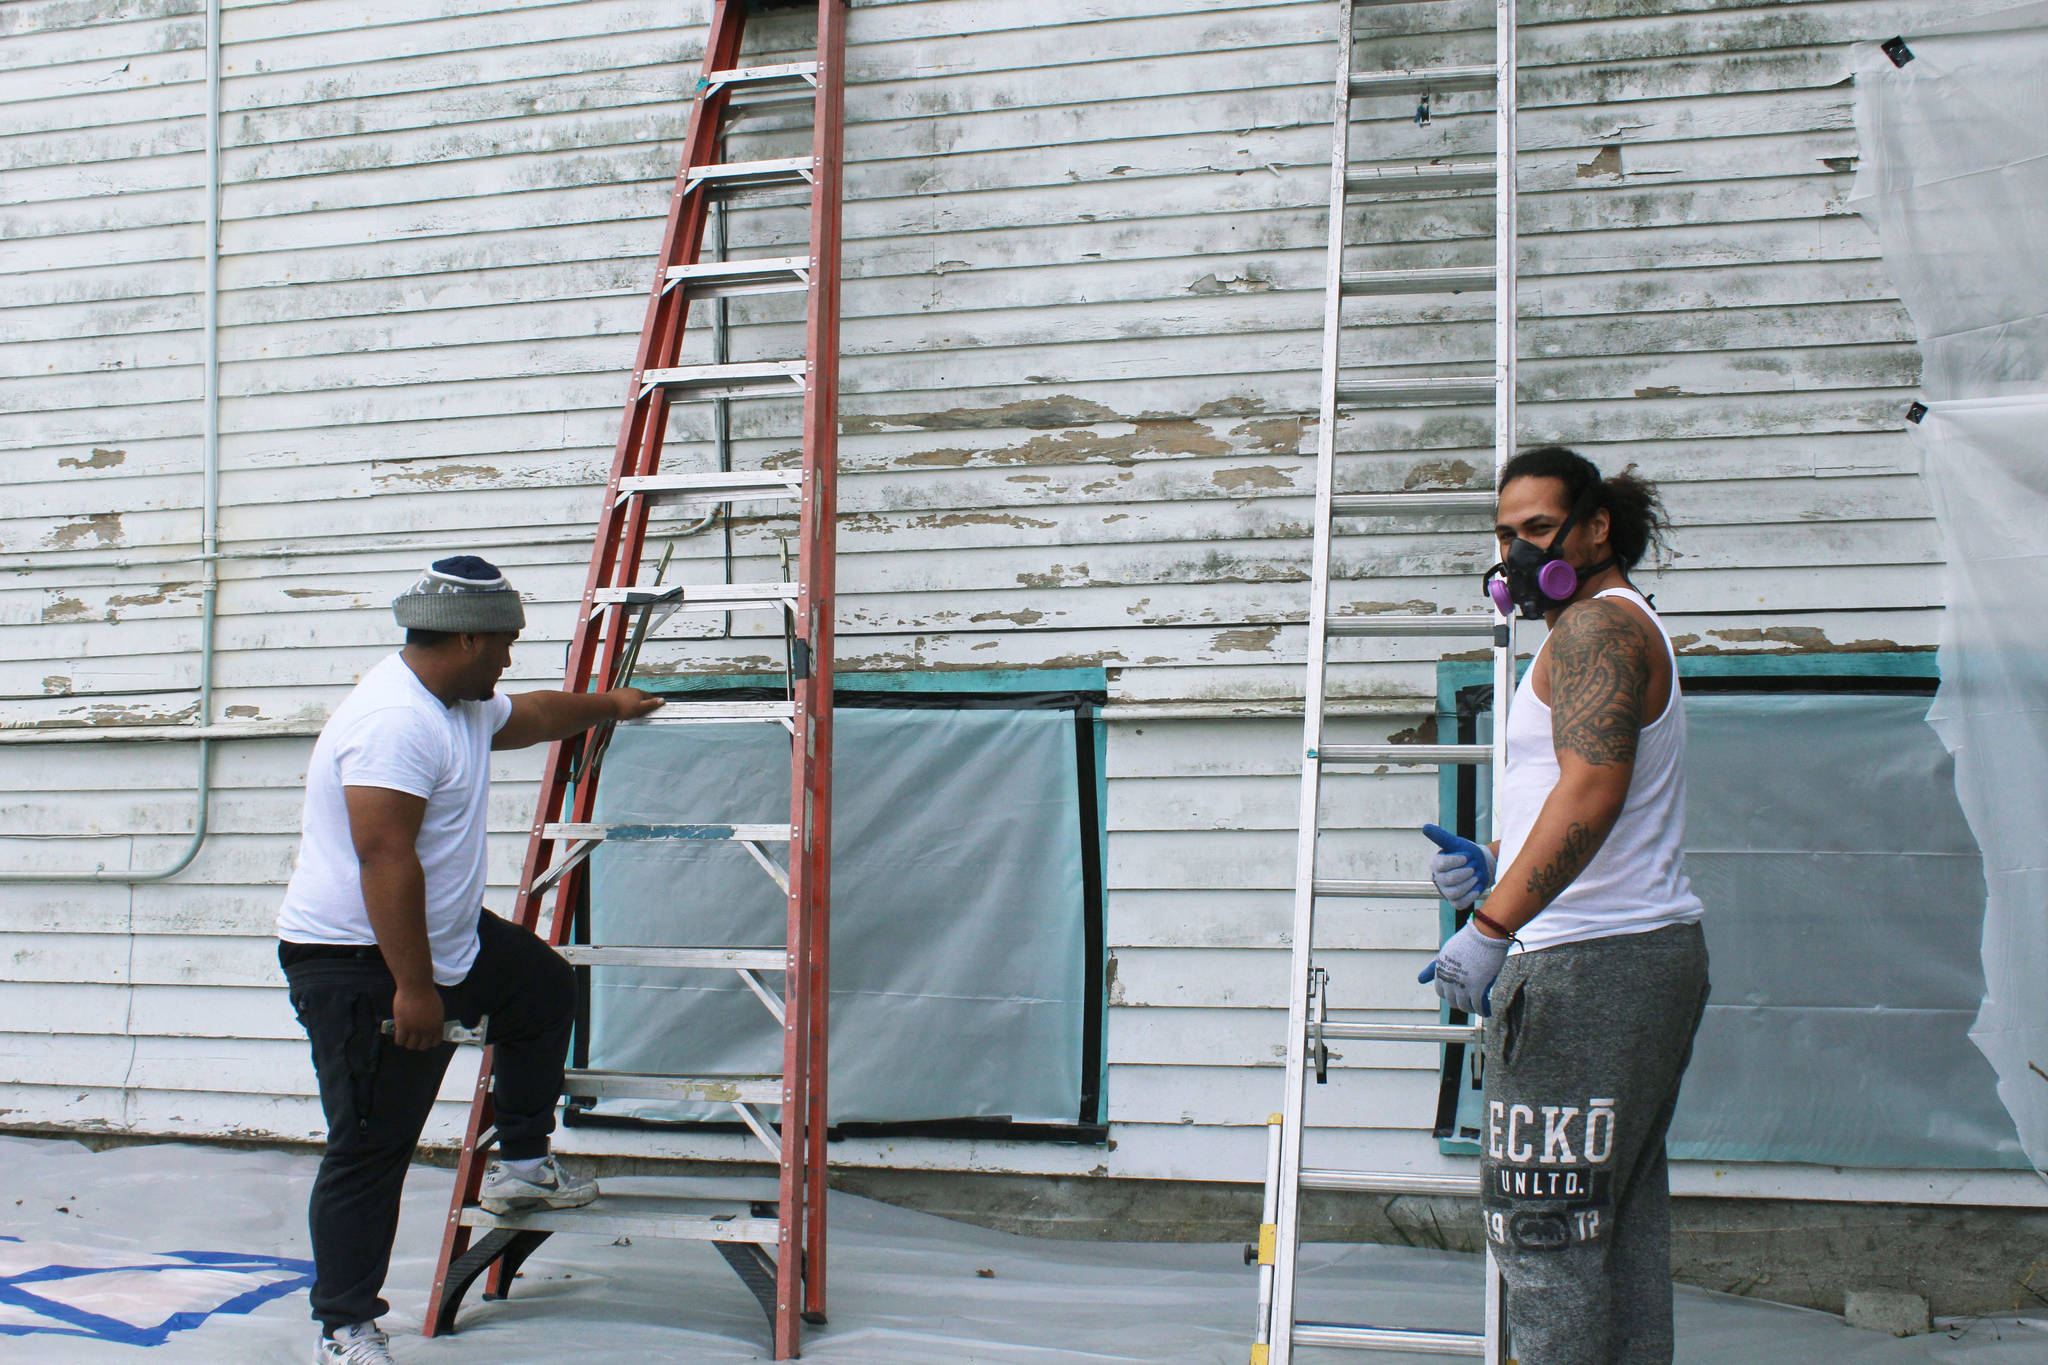 Workers Mason Tau, right, and Barry Brown, left, begin restoration project at Bayview Community Hall in Sept. 2019 after community meets its fundraising goal